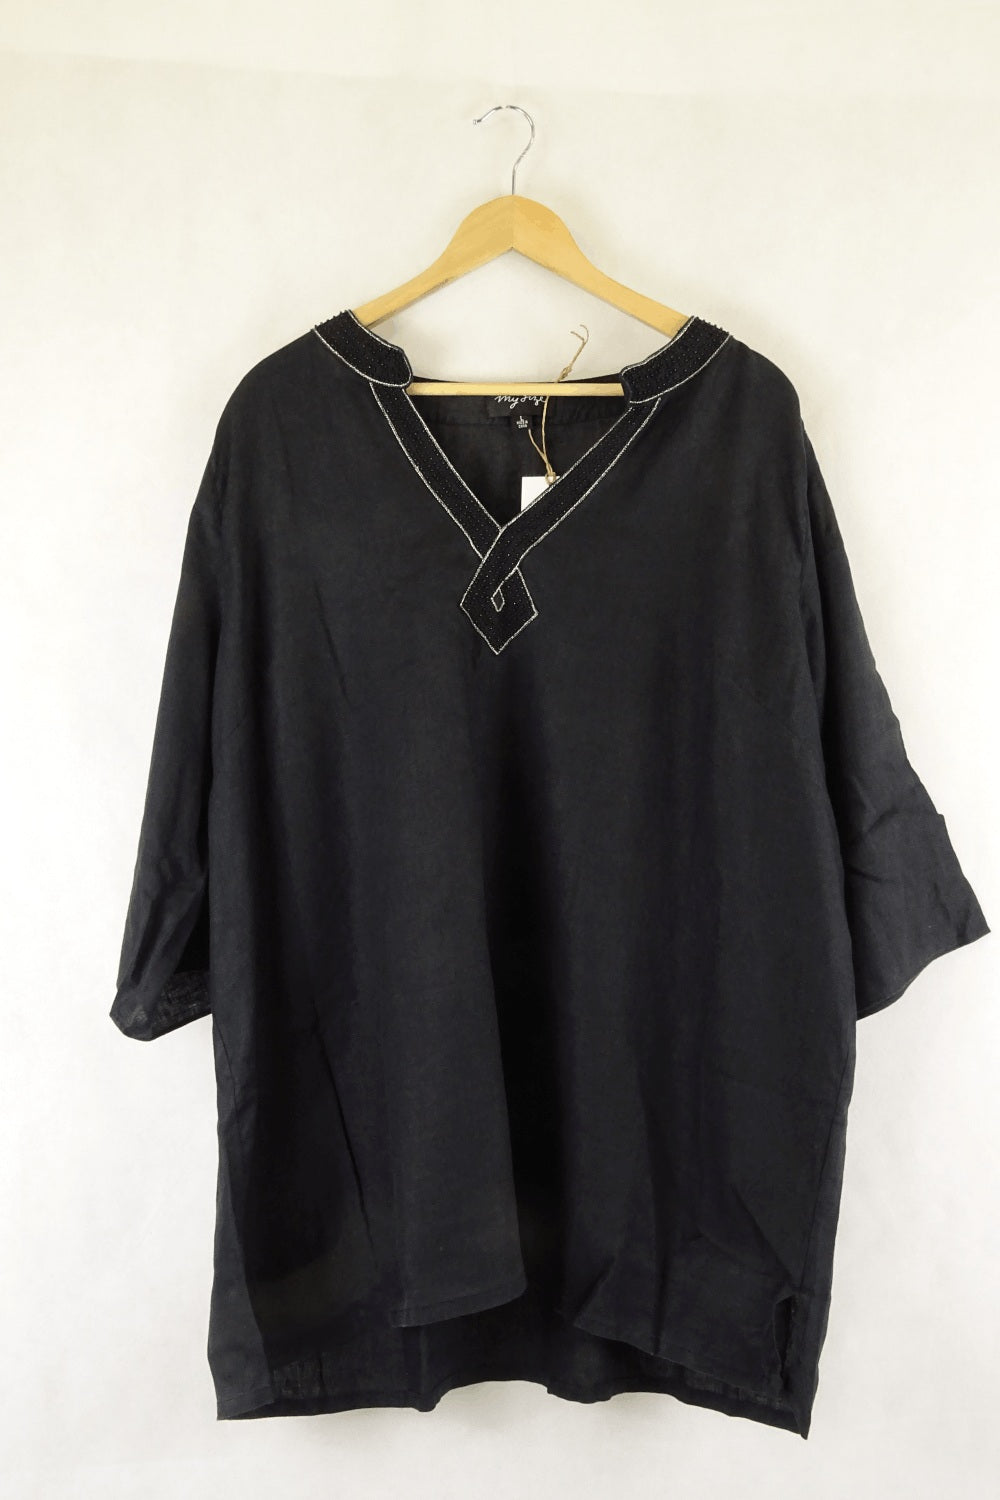 My Size Black Beaded Tunic Top 3/4 Sleeves L